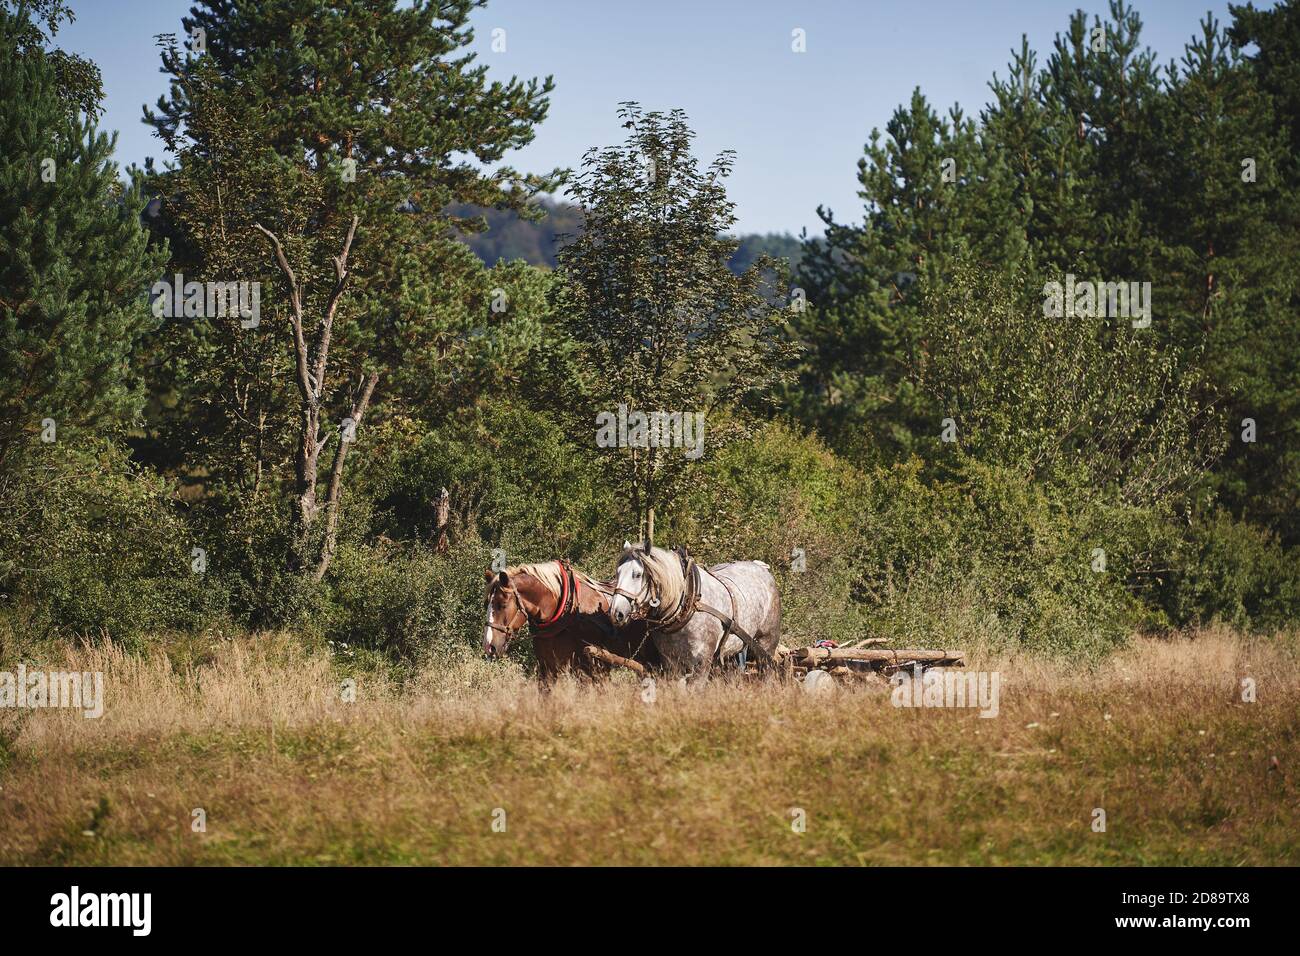 Two horses are pulling a cart along a dirt road among the trees. Rural life in the Beskid Hills in Poland. Stock Photo